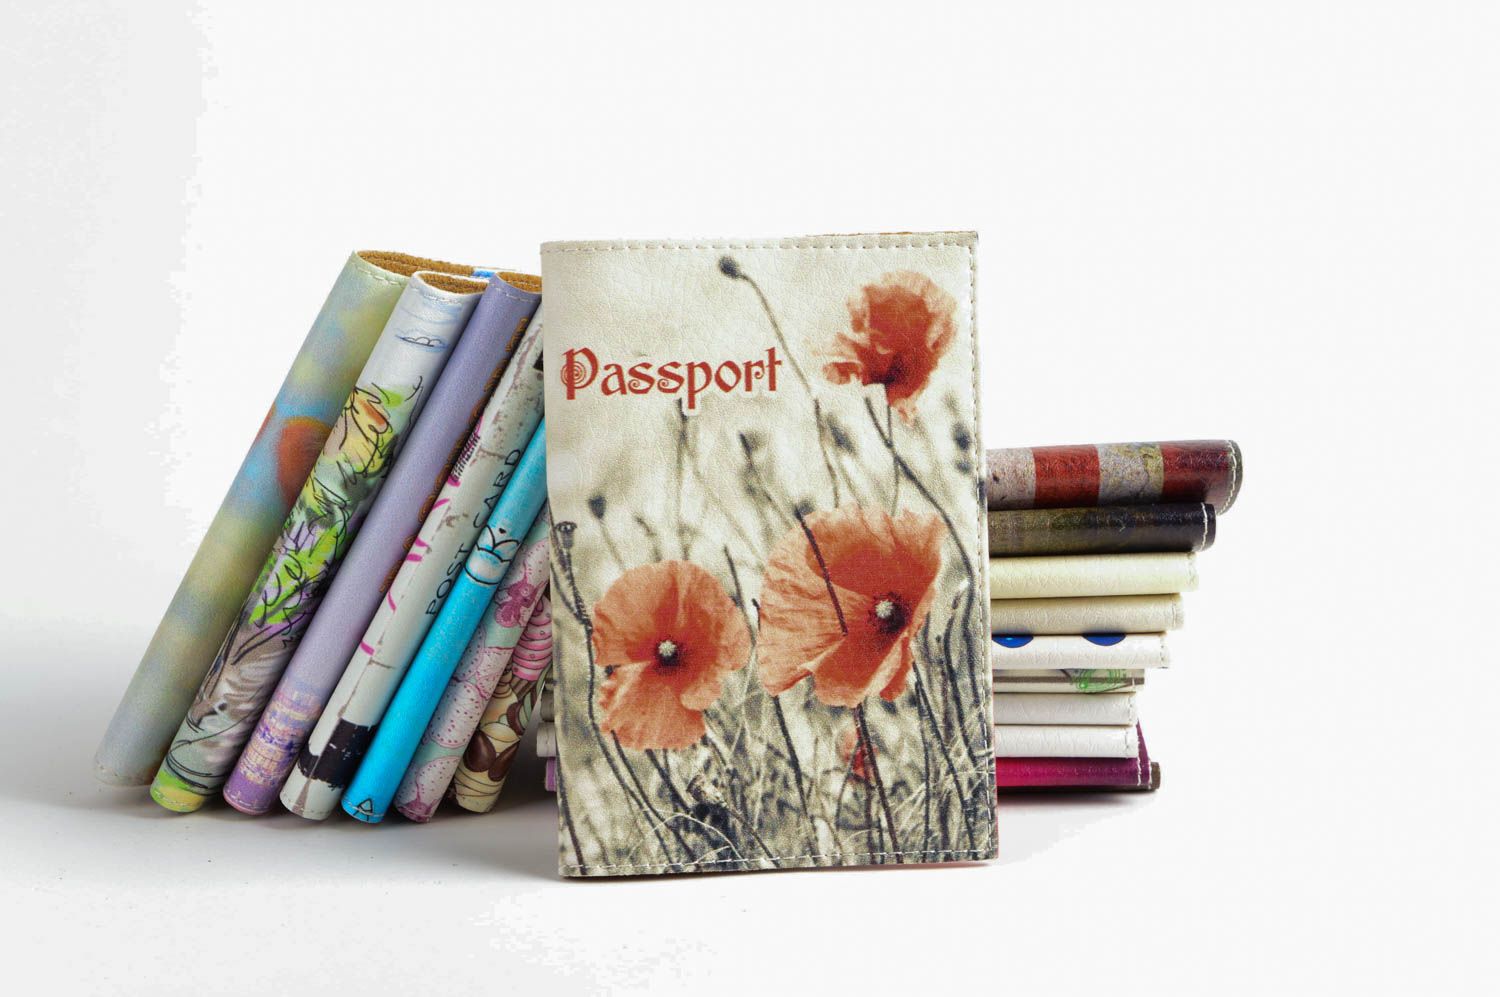 Unusual handmade leather passport cover handmade accessories small gifts photo 1